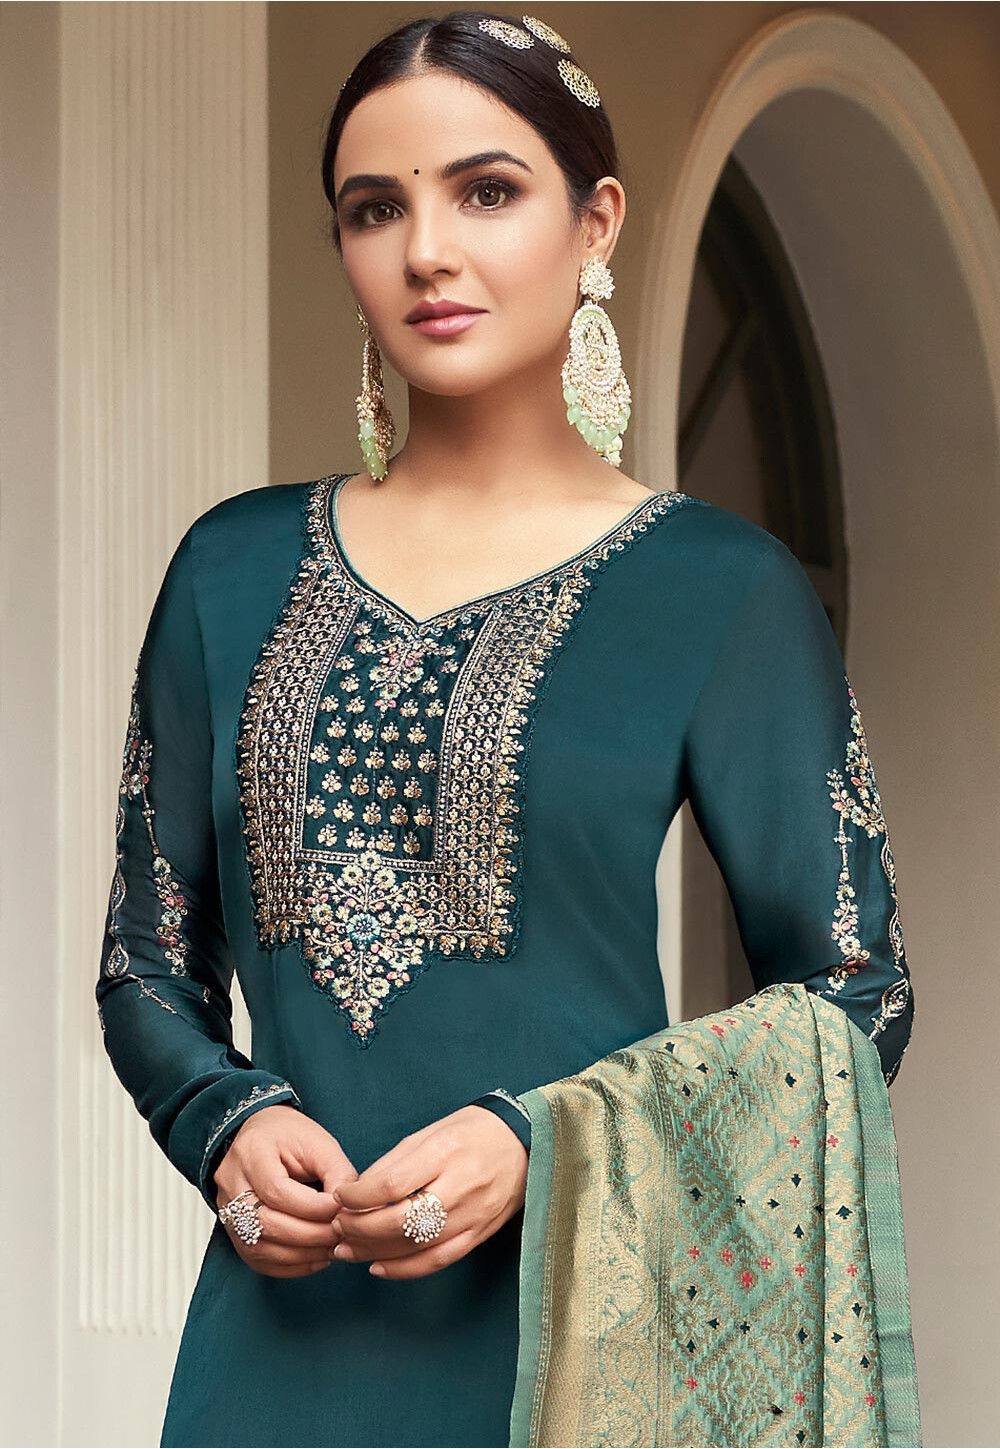 Embroidered Satin Georgette Pakistani Suit in Teal Blue : KCH8144